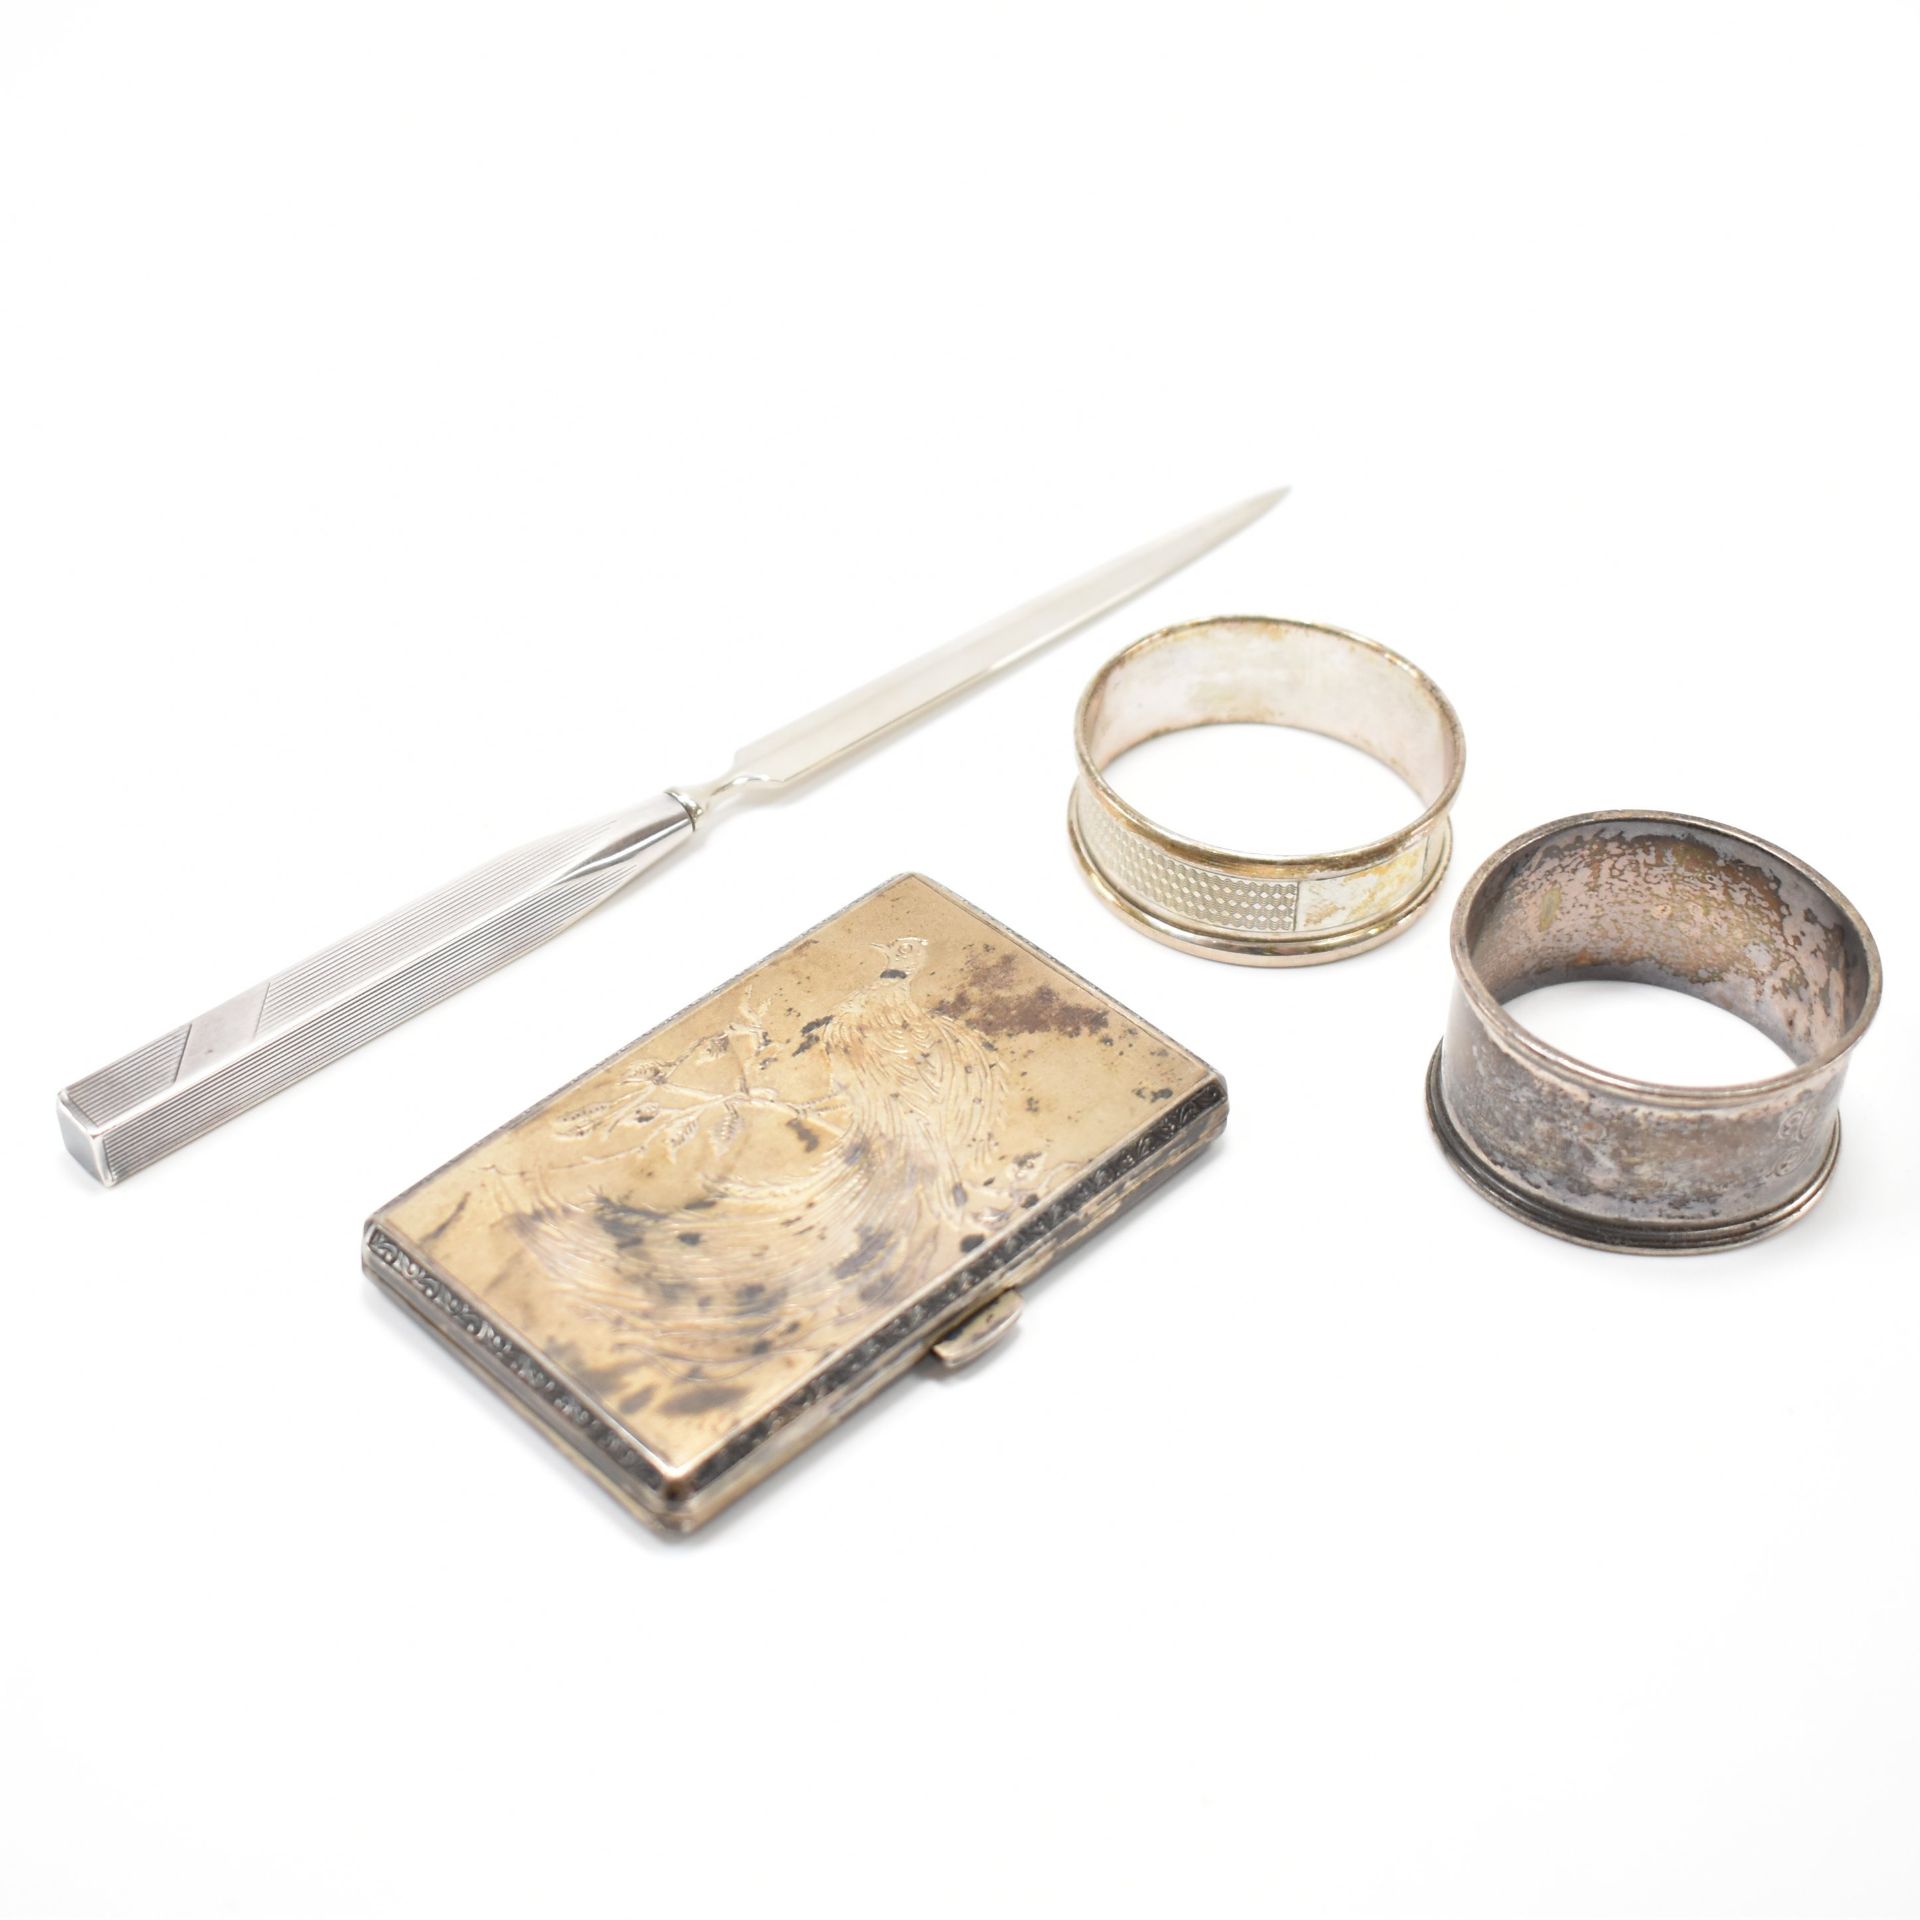 SELECTION OF SILVER ITEMS - CIGARETTE CASE & LETTER OPENER